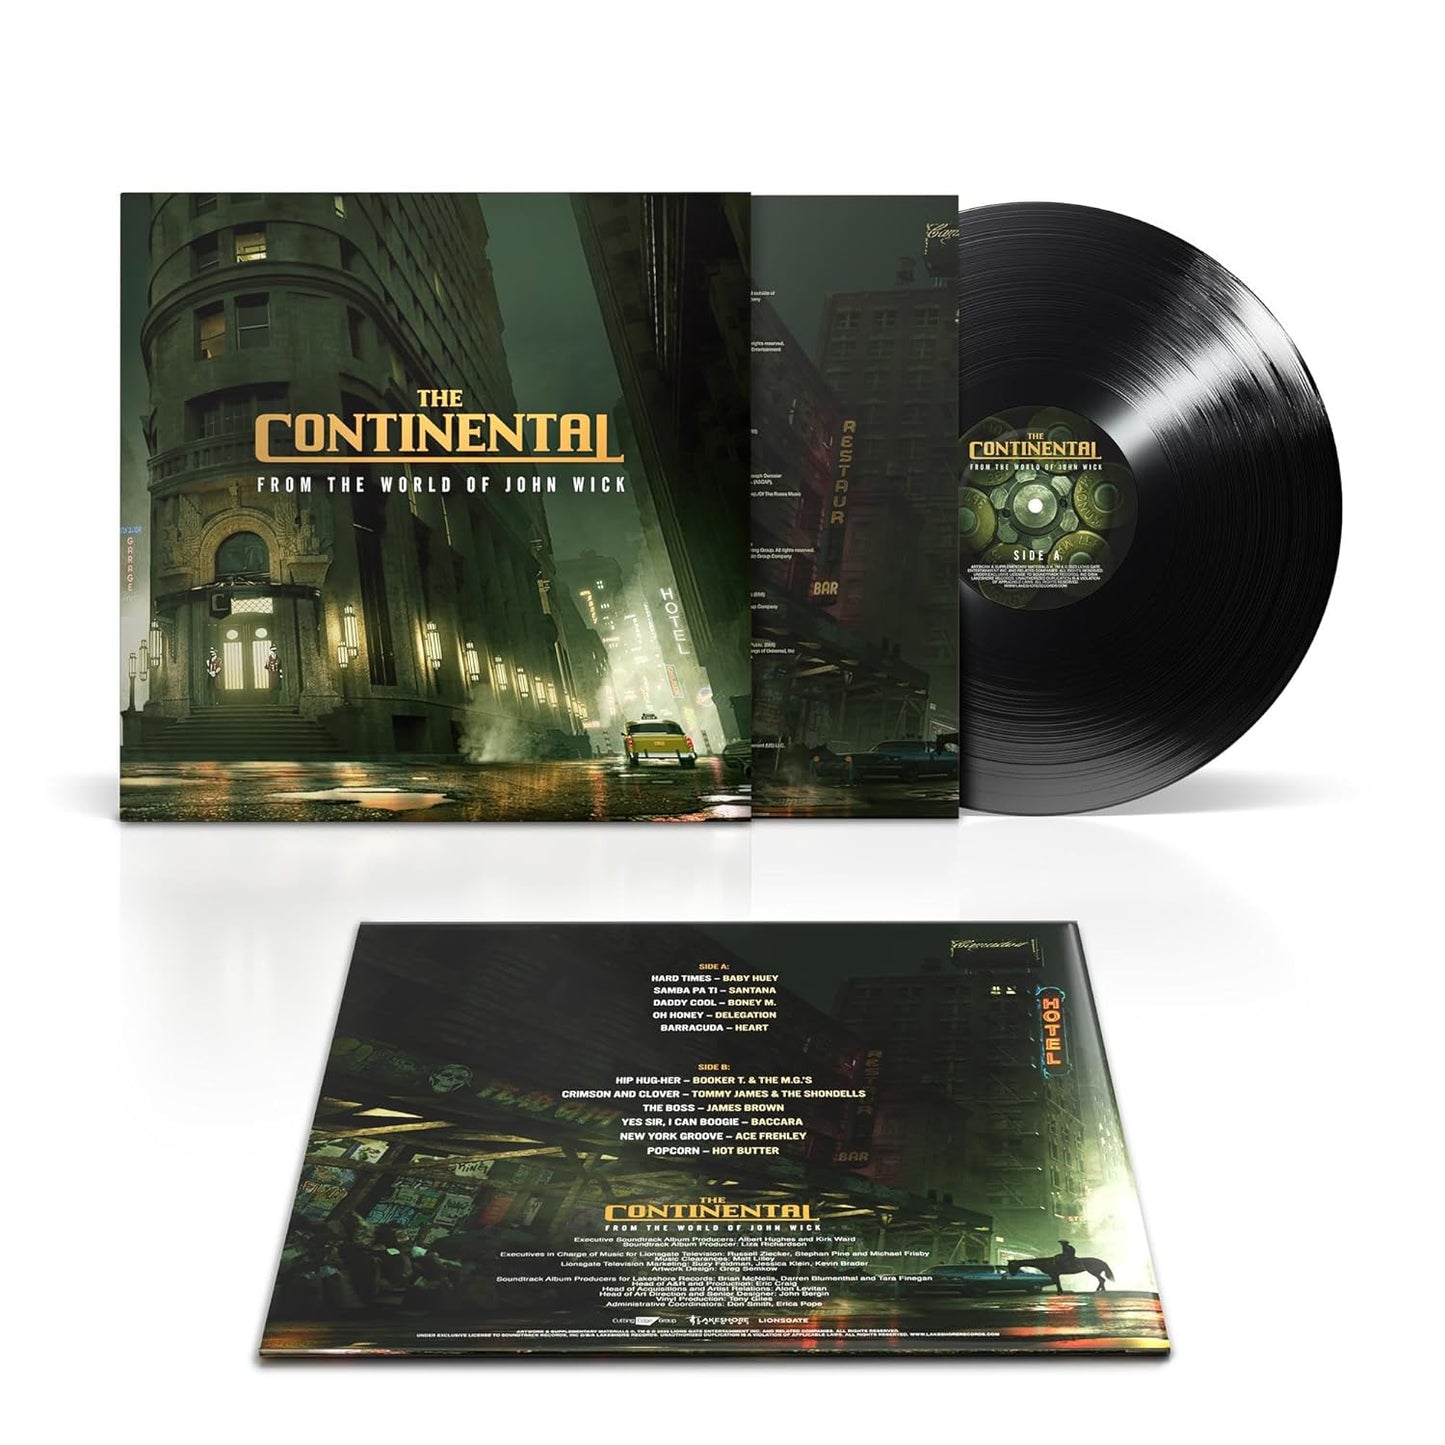 The Continental - From The World Of John Wick (Original Soundtrack) (Vinyl LP)